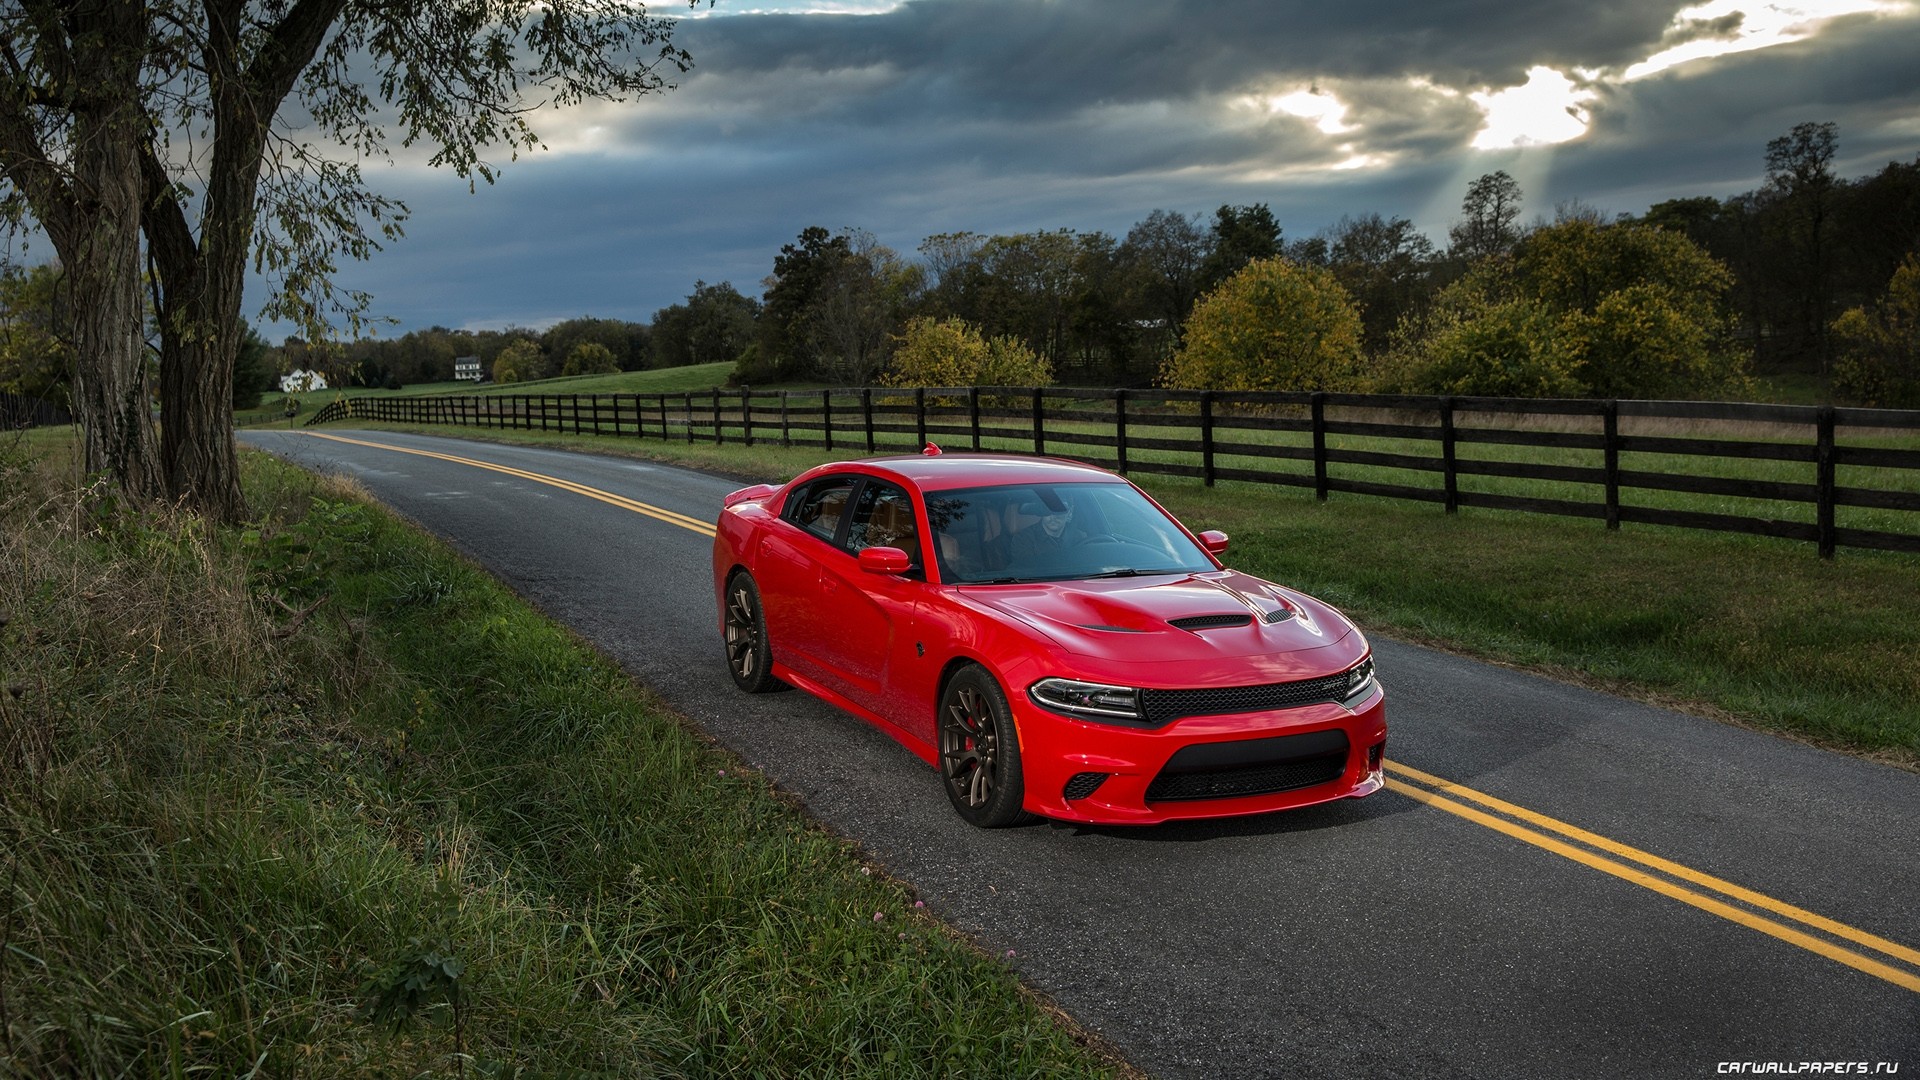 Charger Hellcat Free Wallpaper